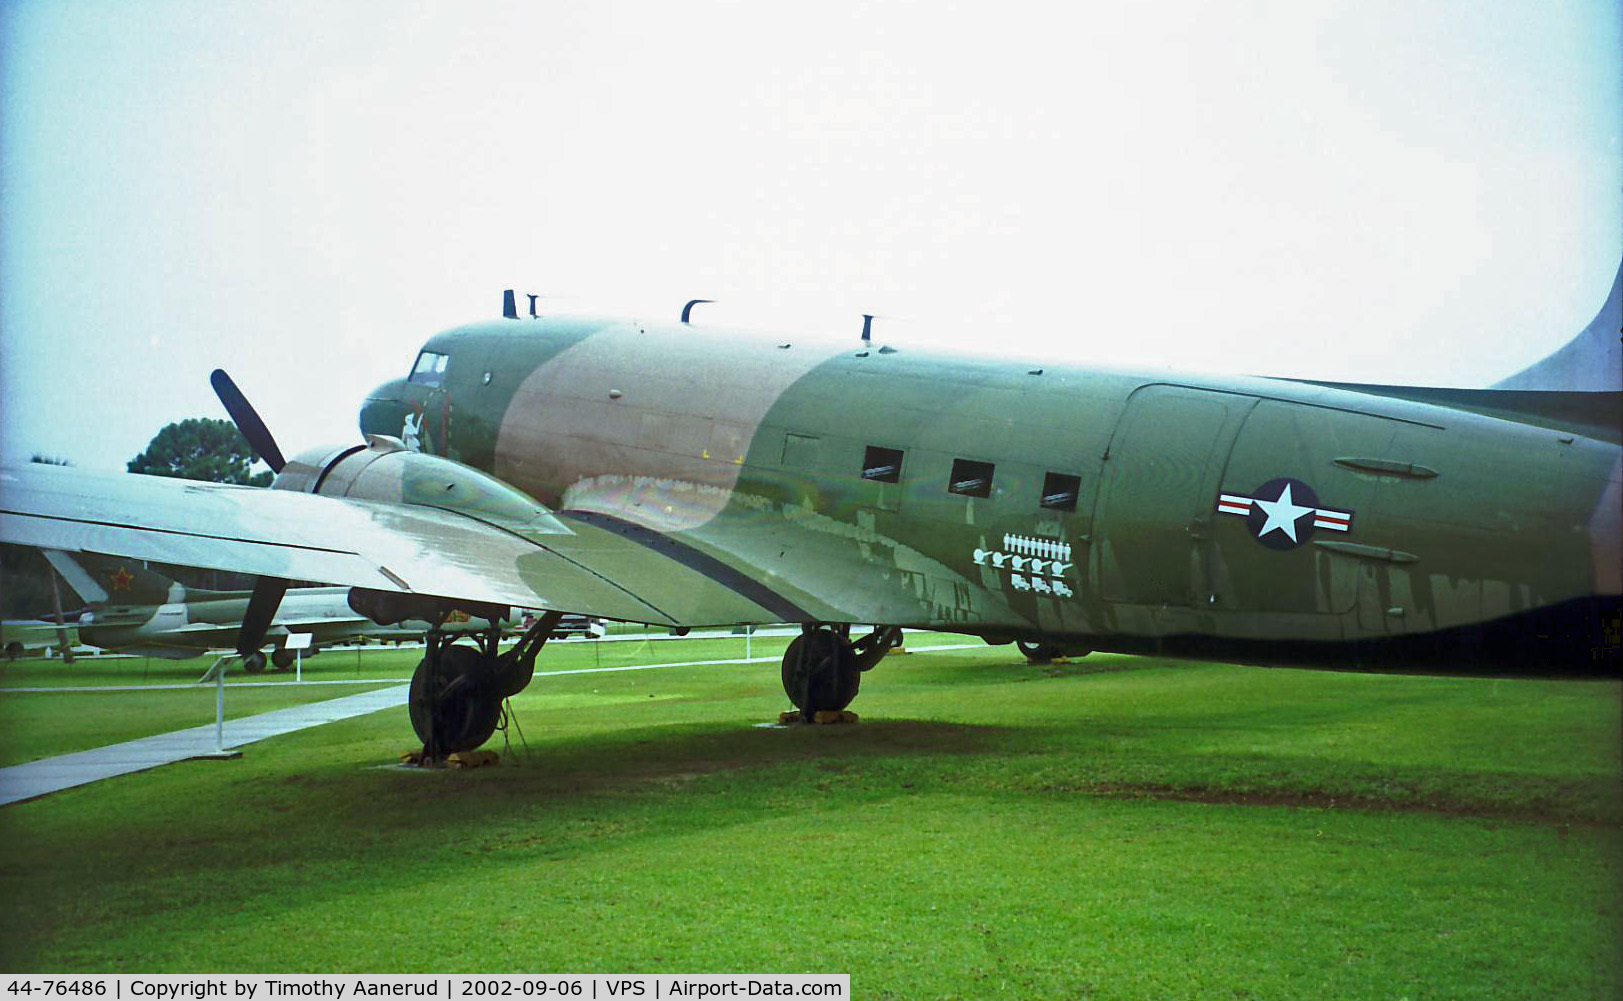 44-76486, 1944 Douglas C-47B-25-DK (R4D-7) Skytrain C/N 16070, USAF Armament Museum, Douglas C-47K, 44-76486, transfer to the Navy as BuNo. 39103, sometime sited incorectly as 44-76876, on display as a AC-47D.  Registration on aircraft is bogus.